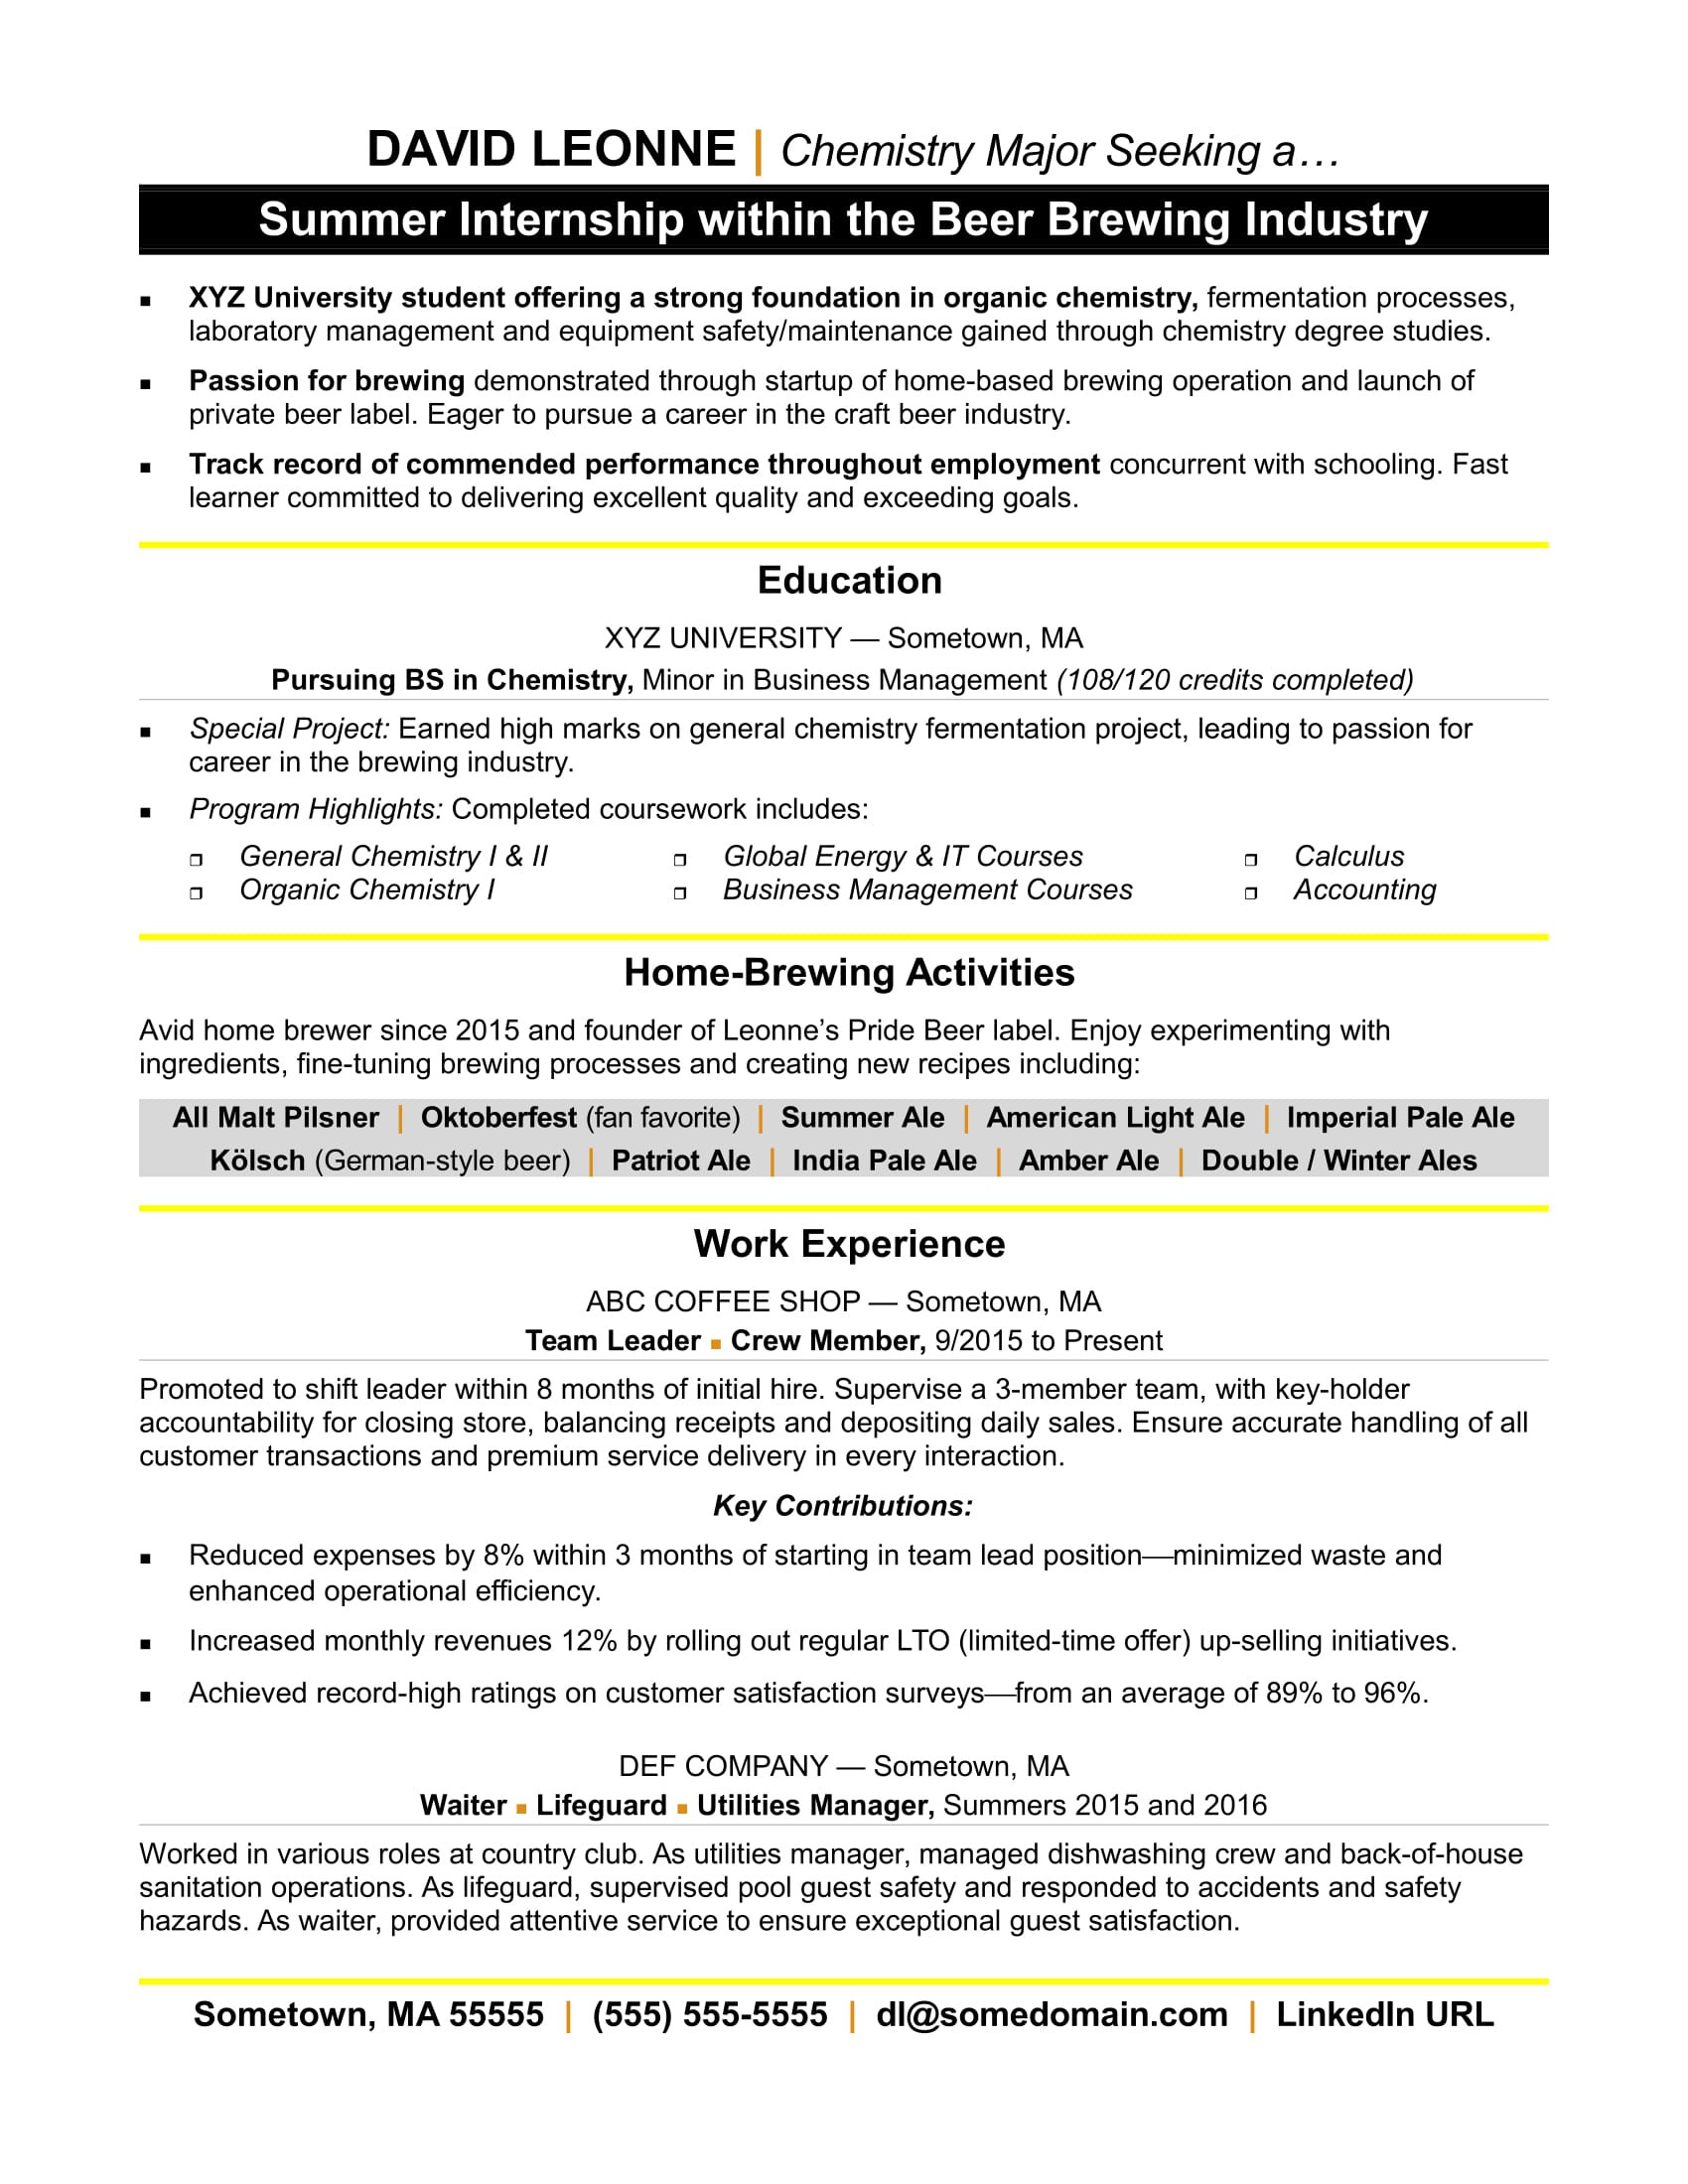 Sample Resume for College Student for Internship Resume for Internship Monster.com